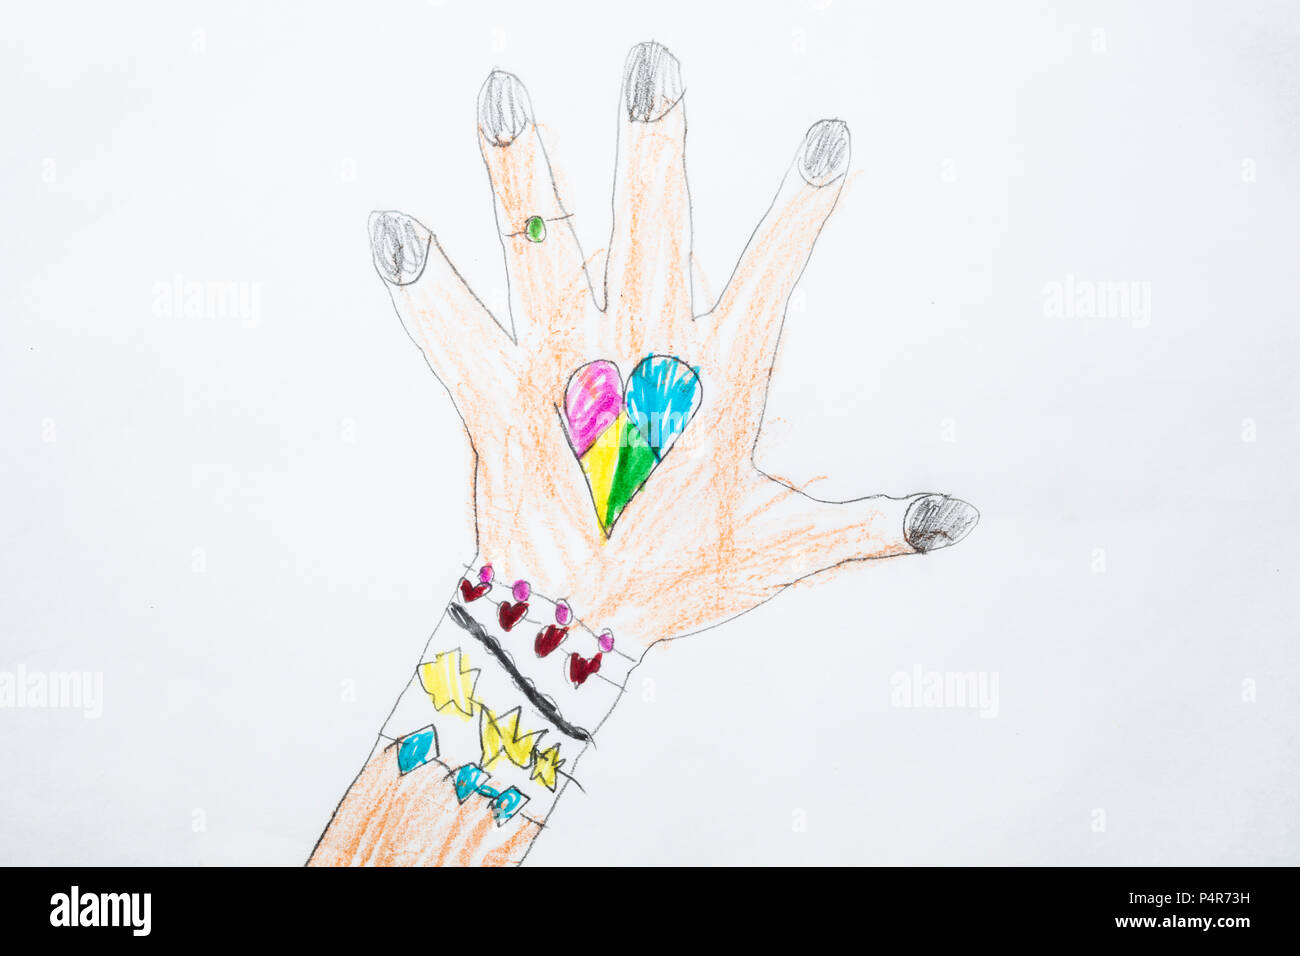 Colorful kid's drawing of a kid's hand with heart shape tattoo Stock Photo  - Alamy